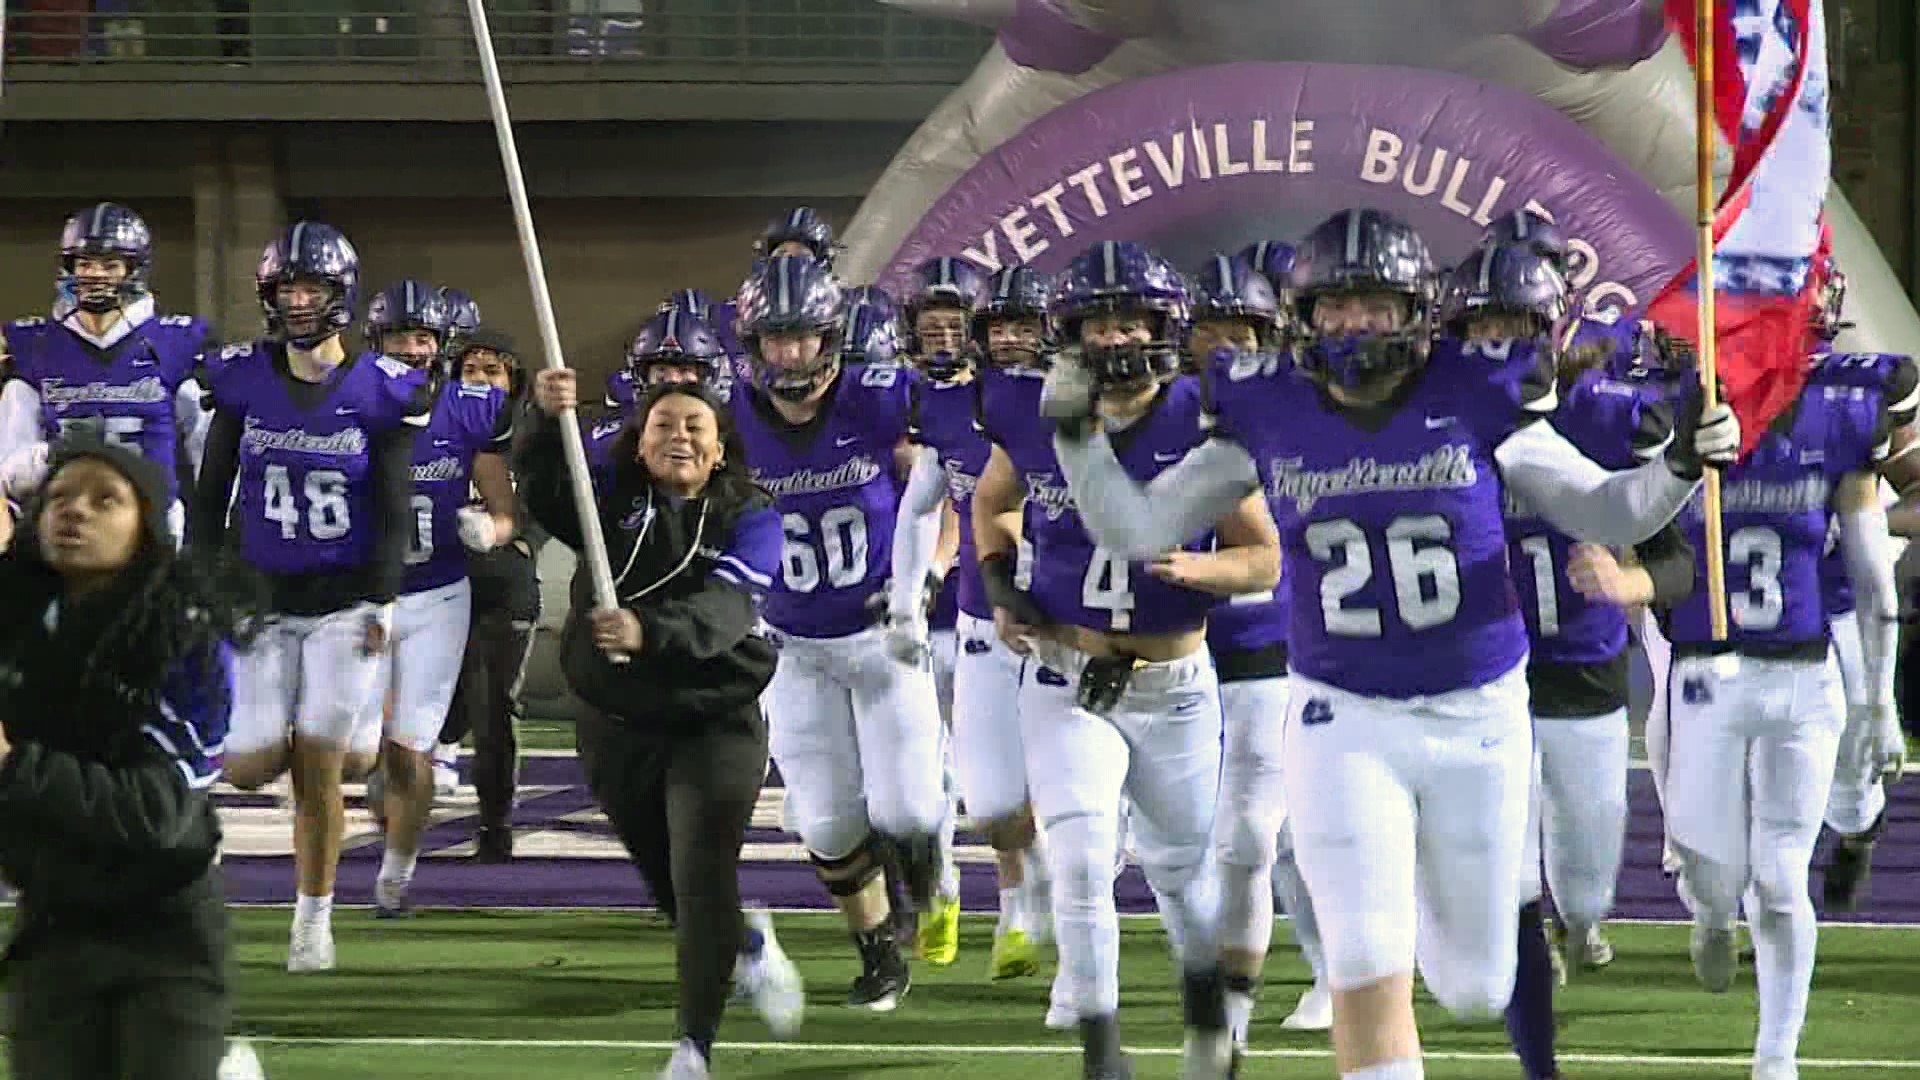 It's finally that time of the week... it's time for Football Friday Night. This week our Game of the Week is a big one: Bentonville at Fayetteville.